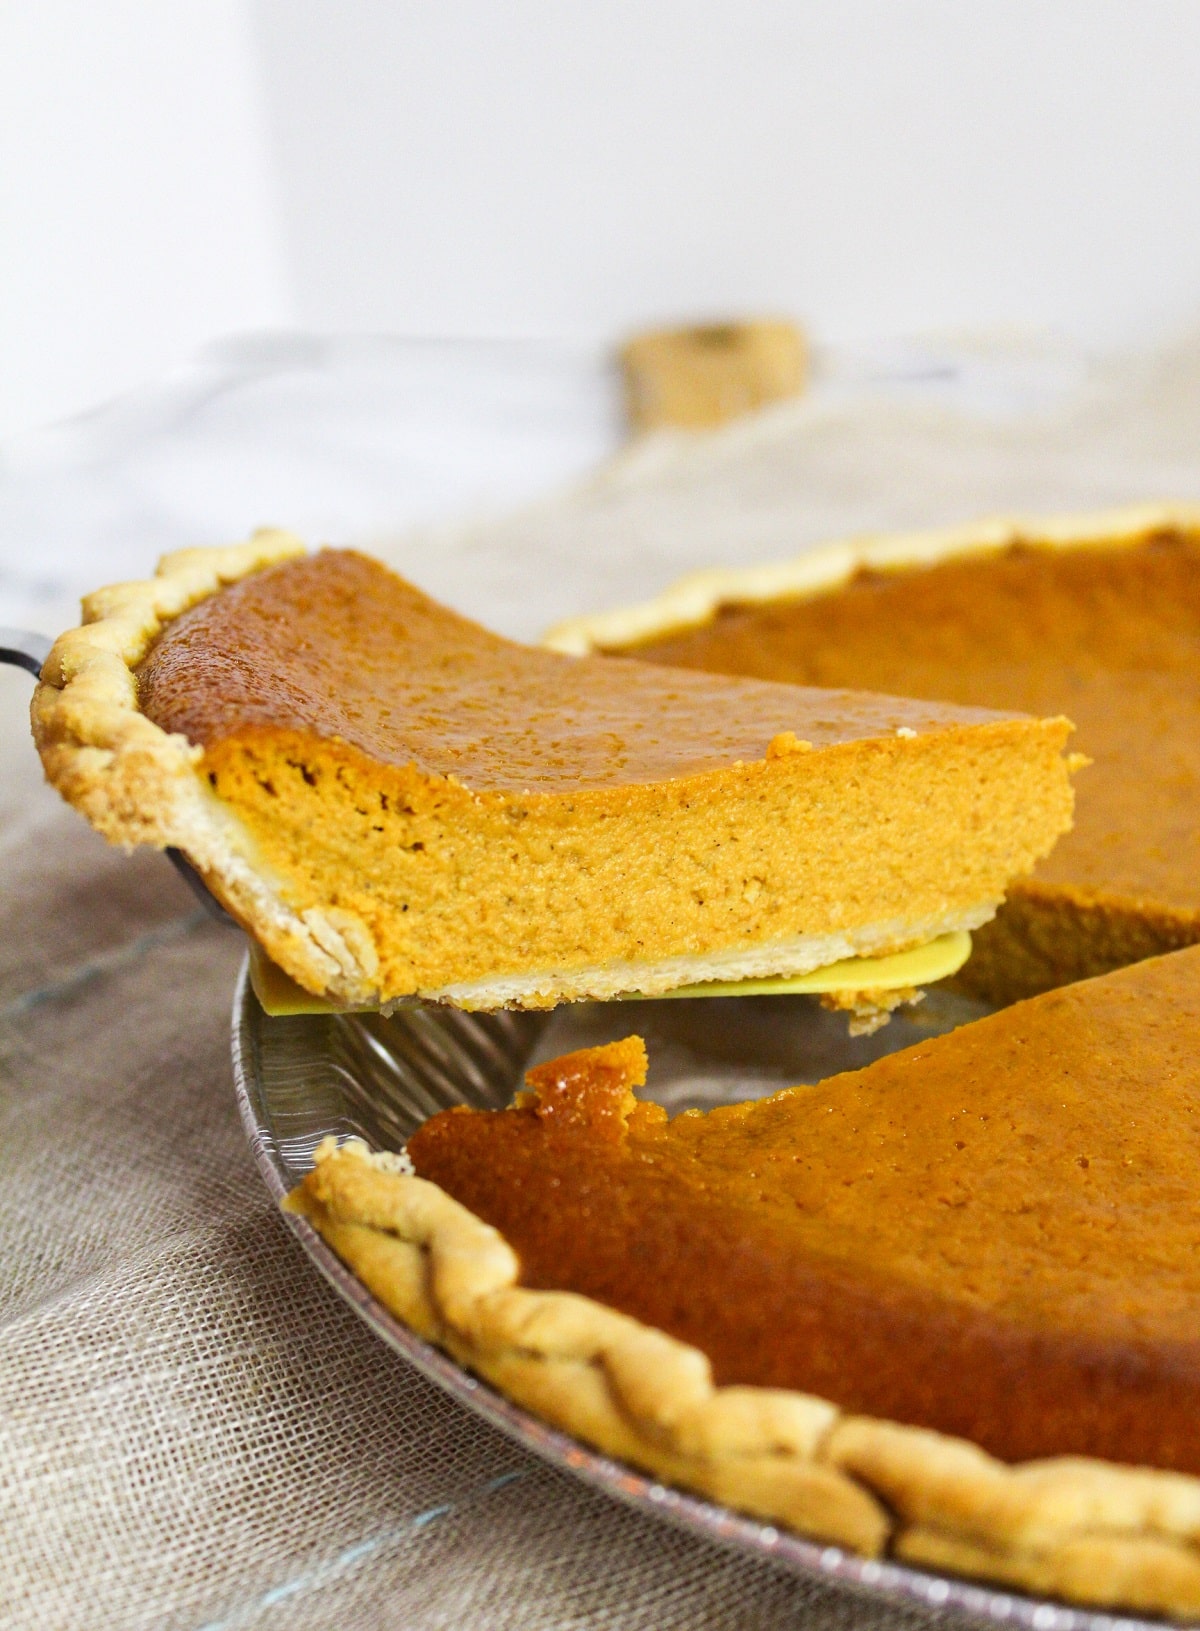 Slice of pumpkin pie lifted from the dish.